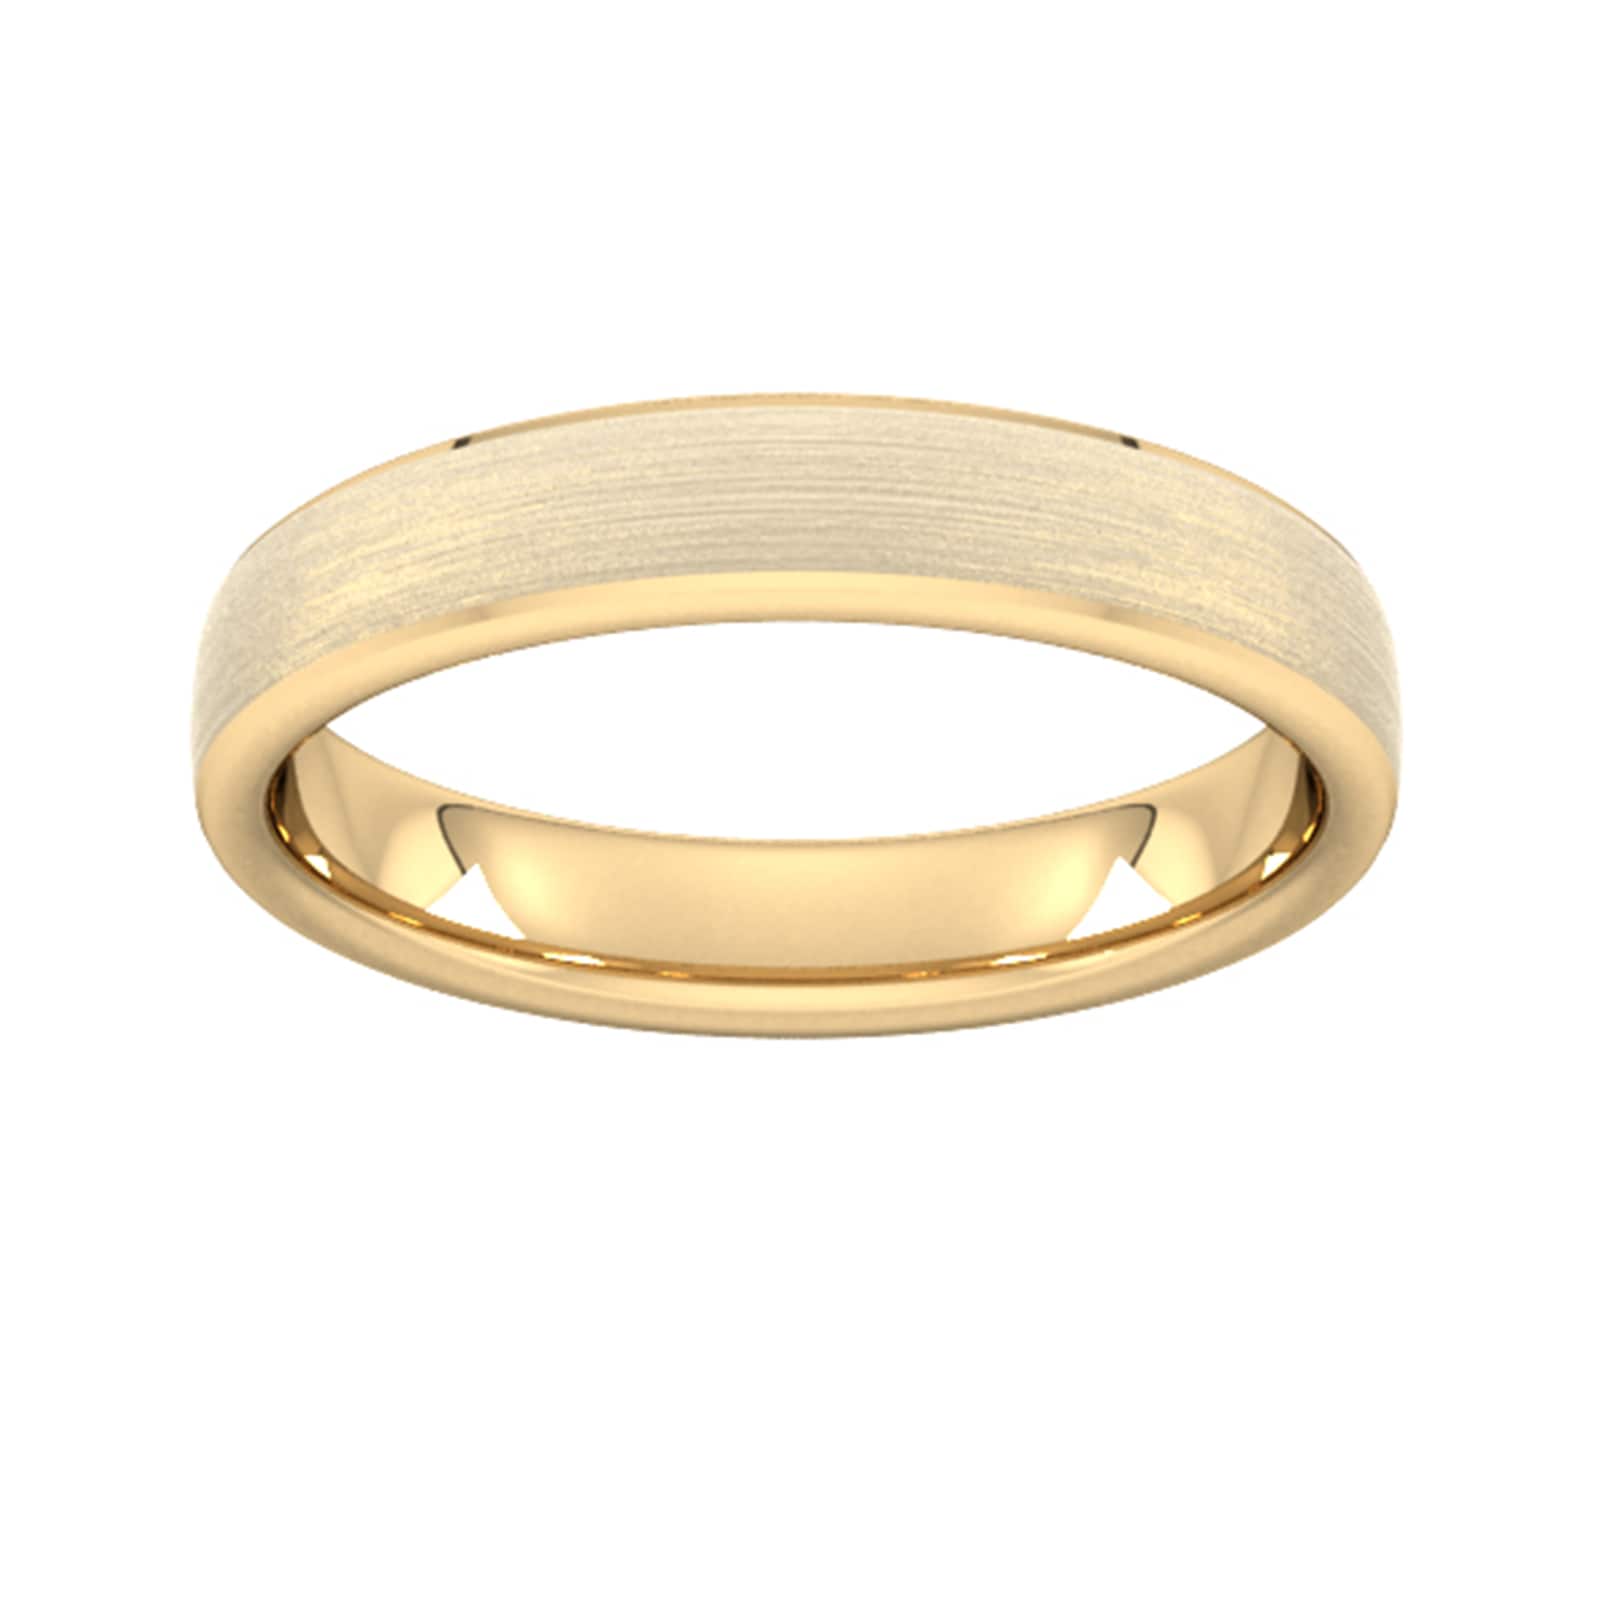 4mm Slight Court Heavy Polished Chamfered Edges With Matt Centre Wedding Ring In 18 Carat Yellow Gold - Ring Size X